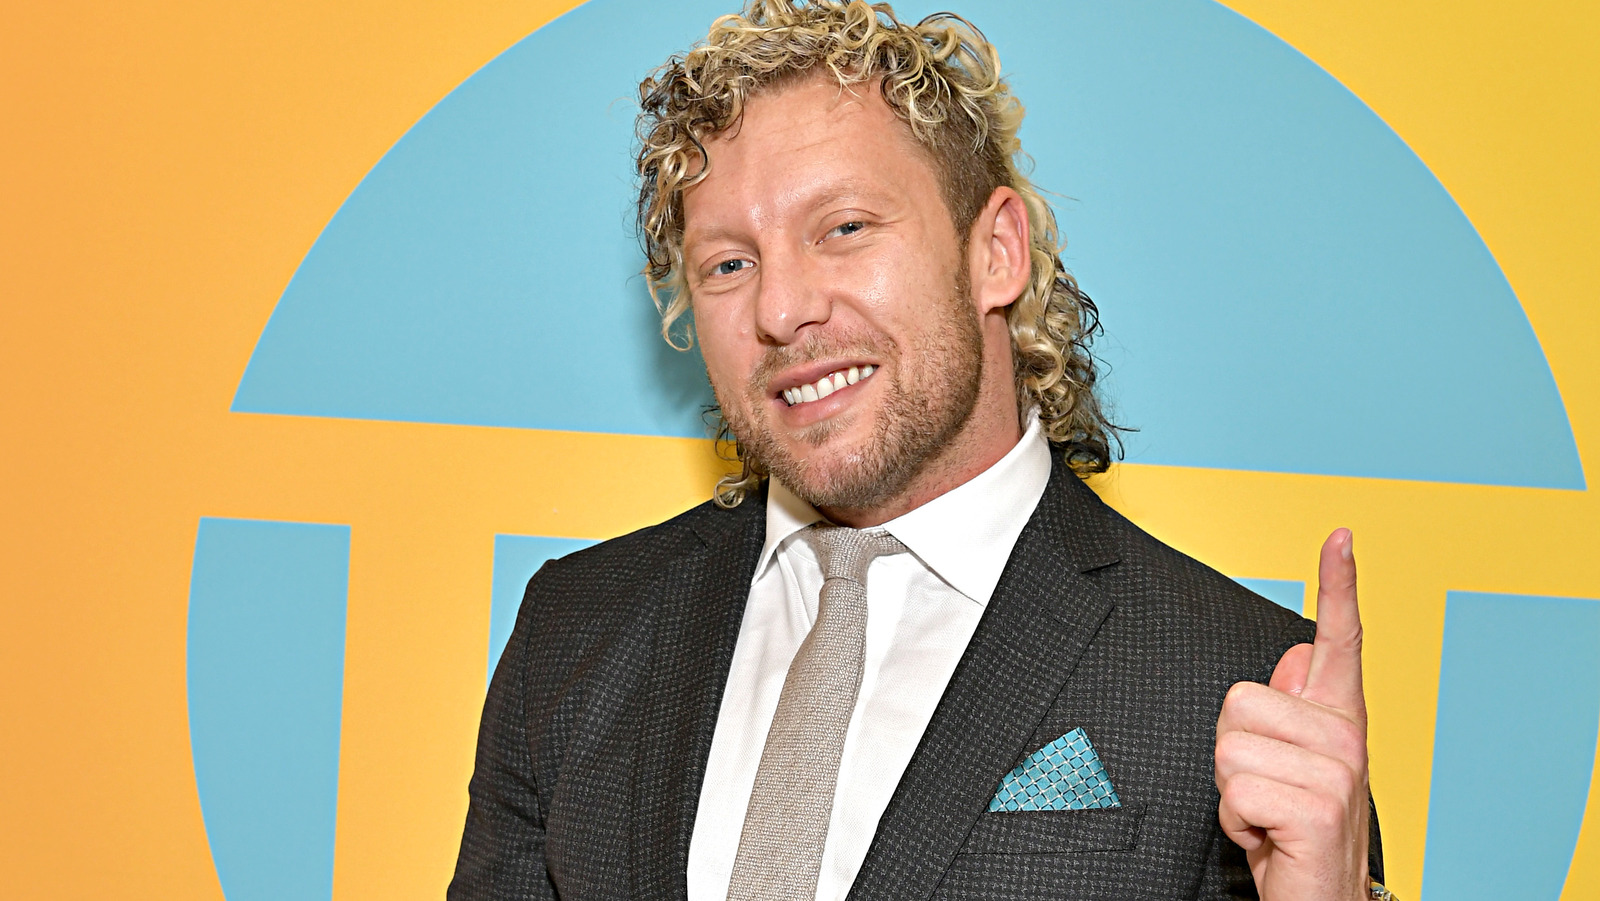 AEW's Kenny Omega To Host Launch Stream For Popular Video Game Franchise